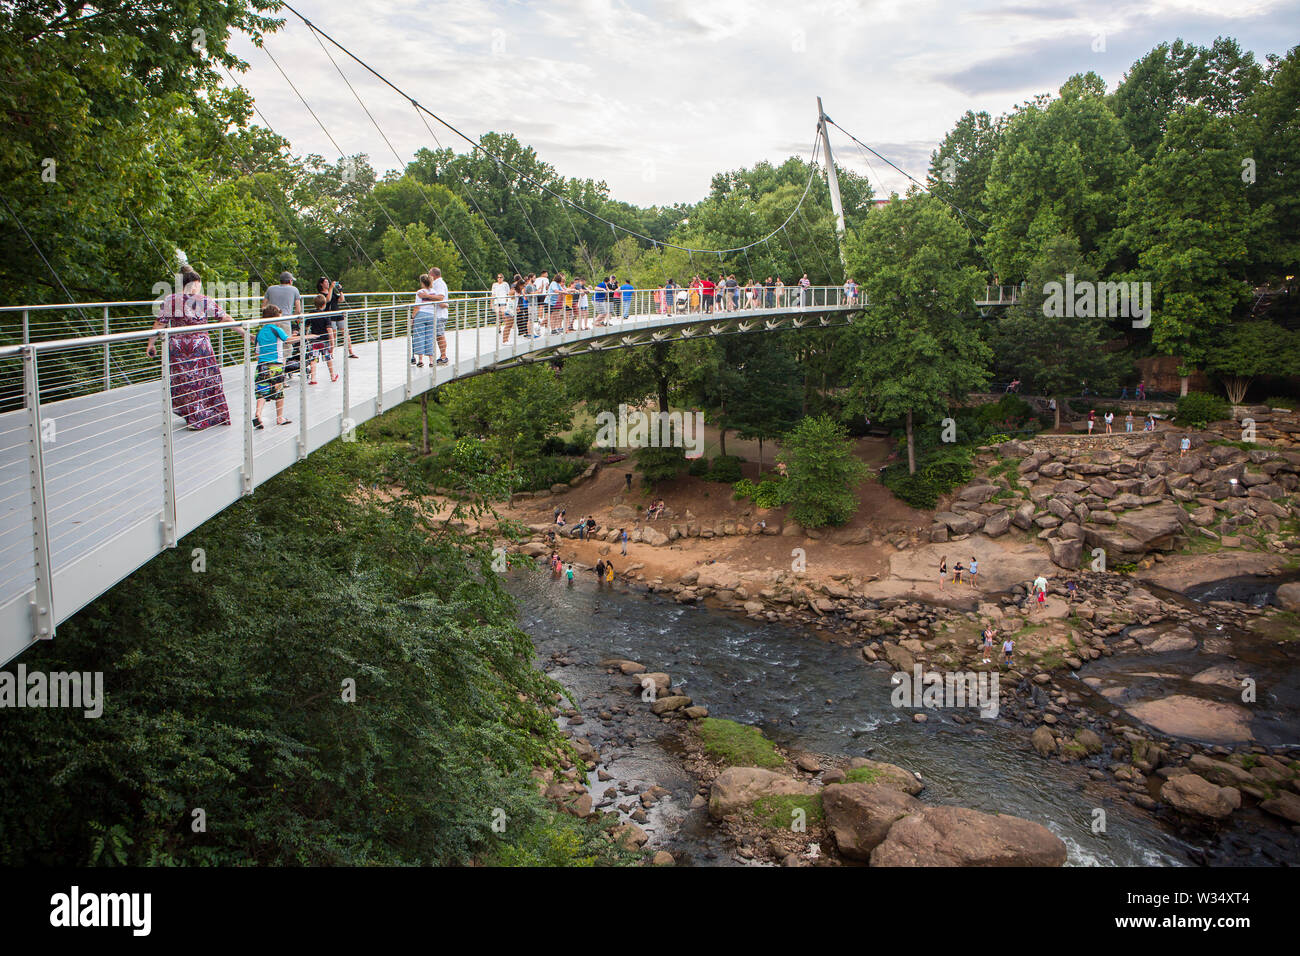 GREENVILLE, SC (USA) - July 5, 2019: Visitors to Falls Park linger on Liberty Bridge overlooking the Reedy River waterfalls. Stock Photo